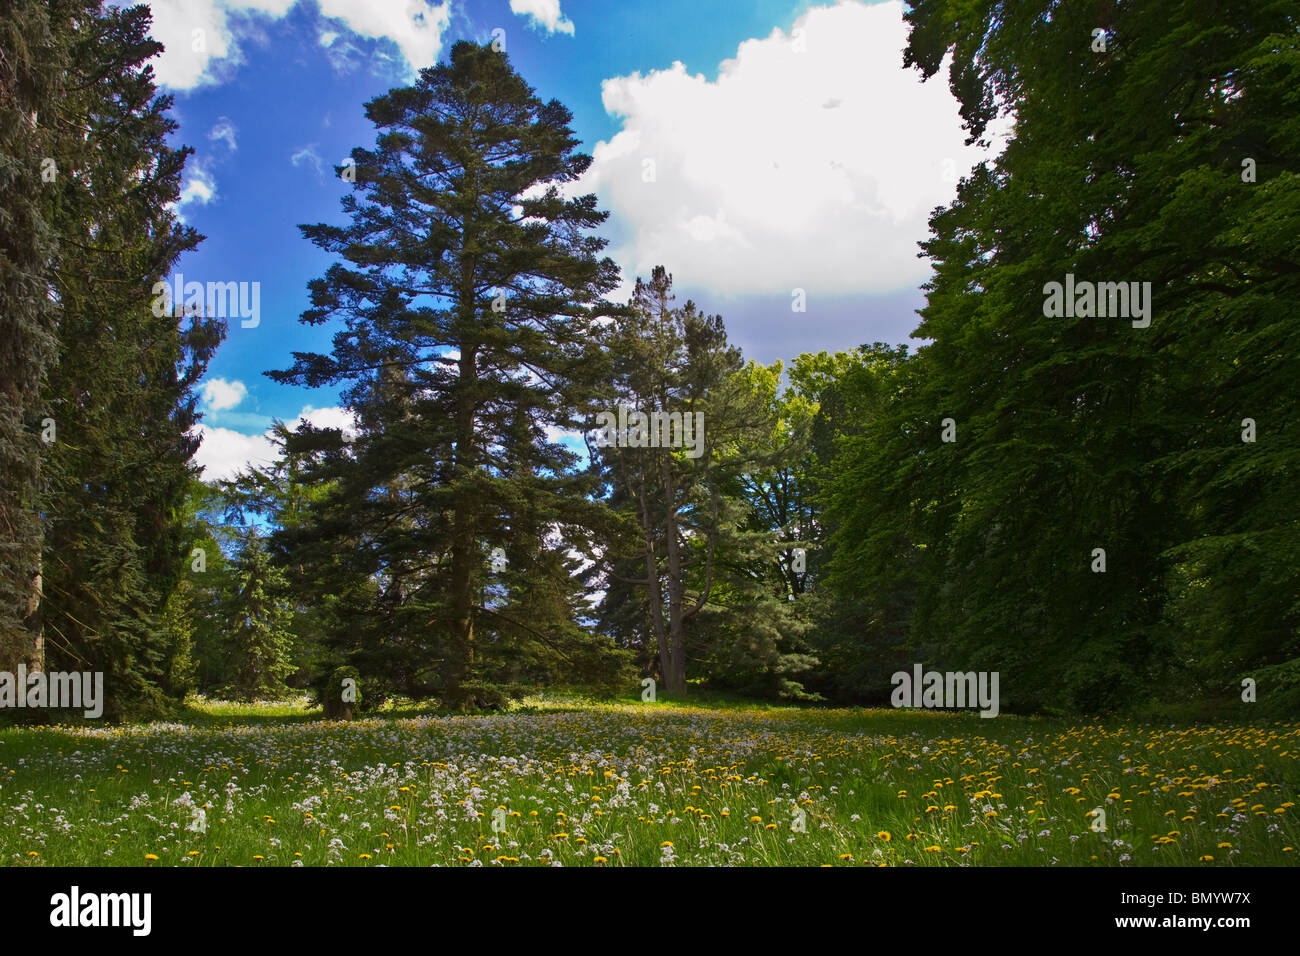 Forest floor covered with dandelions against pine trees and a blue sky. Horizontal Stock Photo